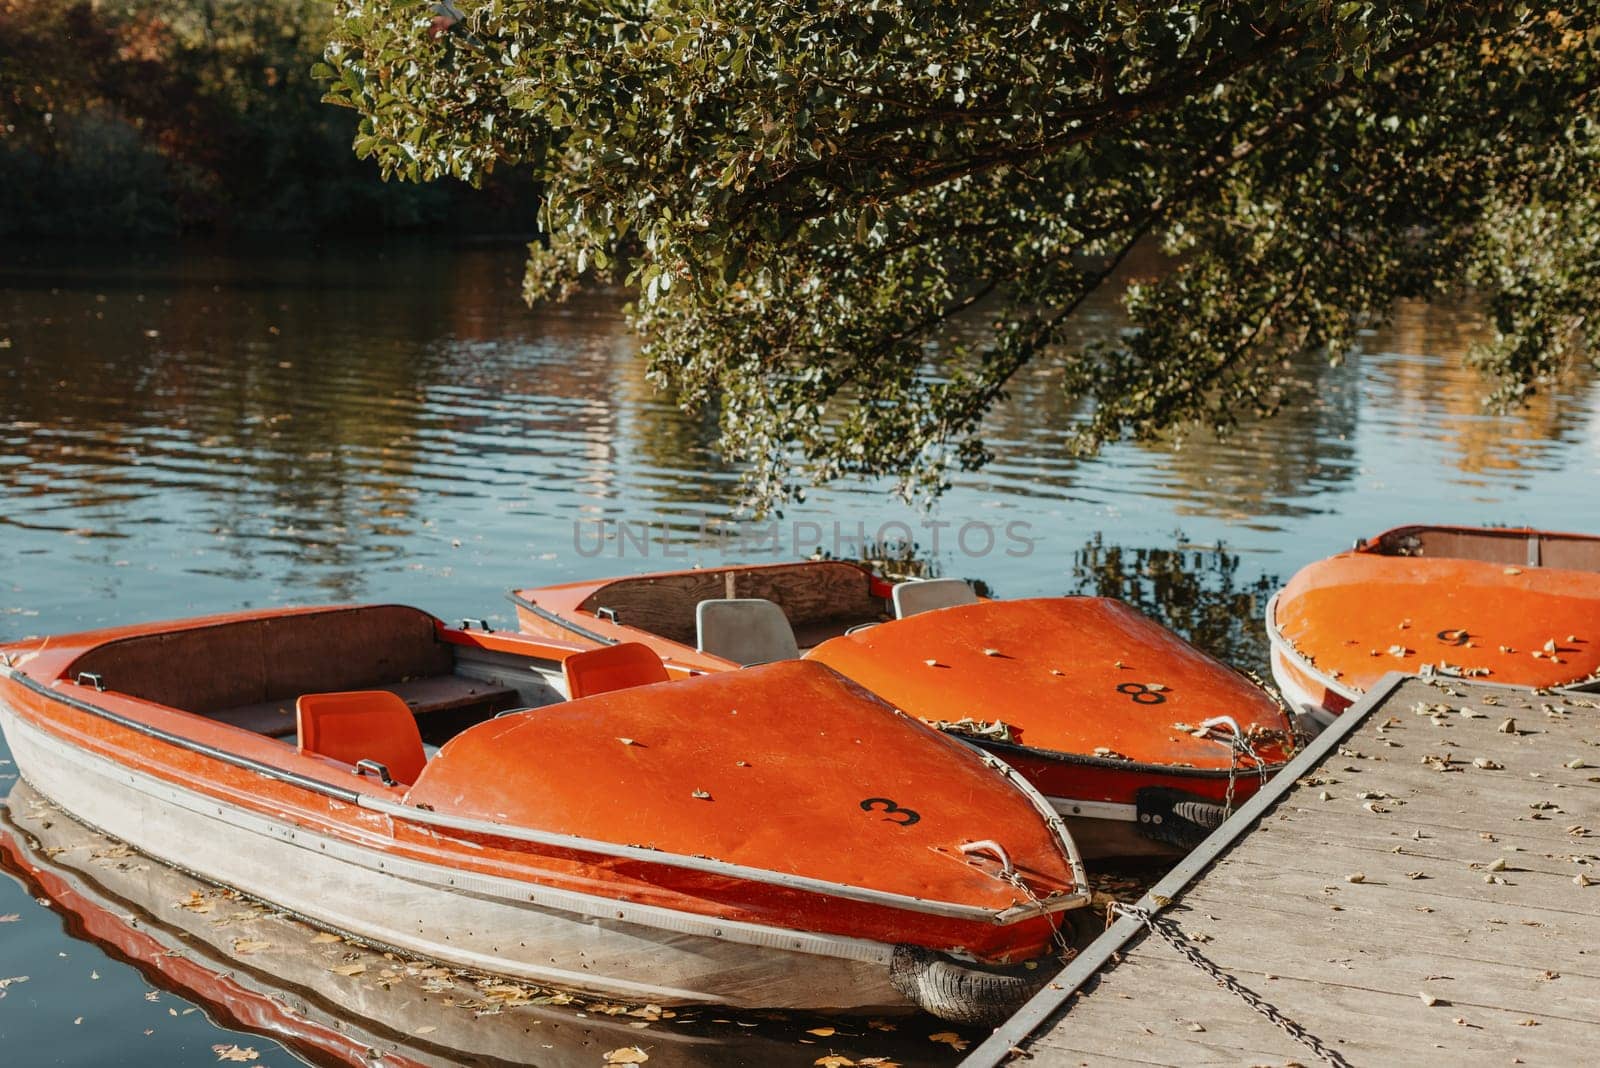 Several boats with oars are moored at the water's edge at the pier in the city park for water walks on the river, lake or pond.